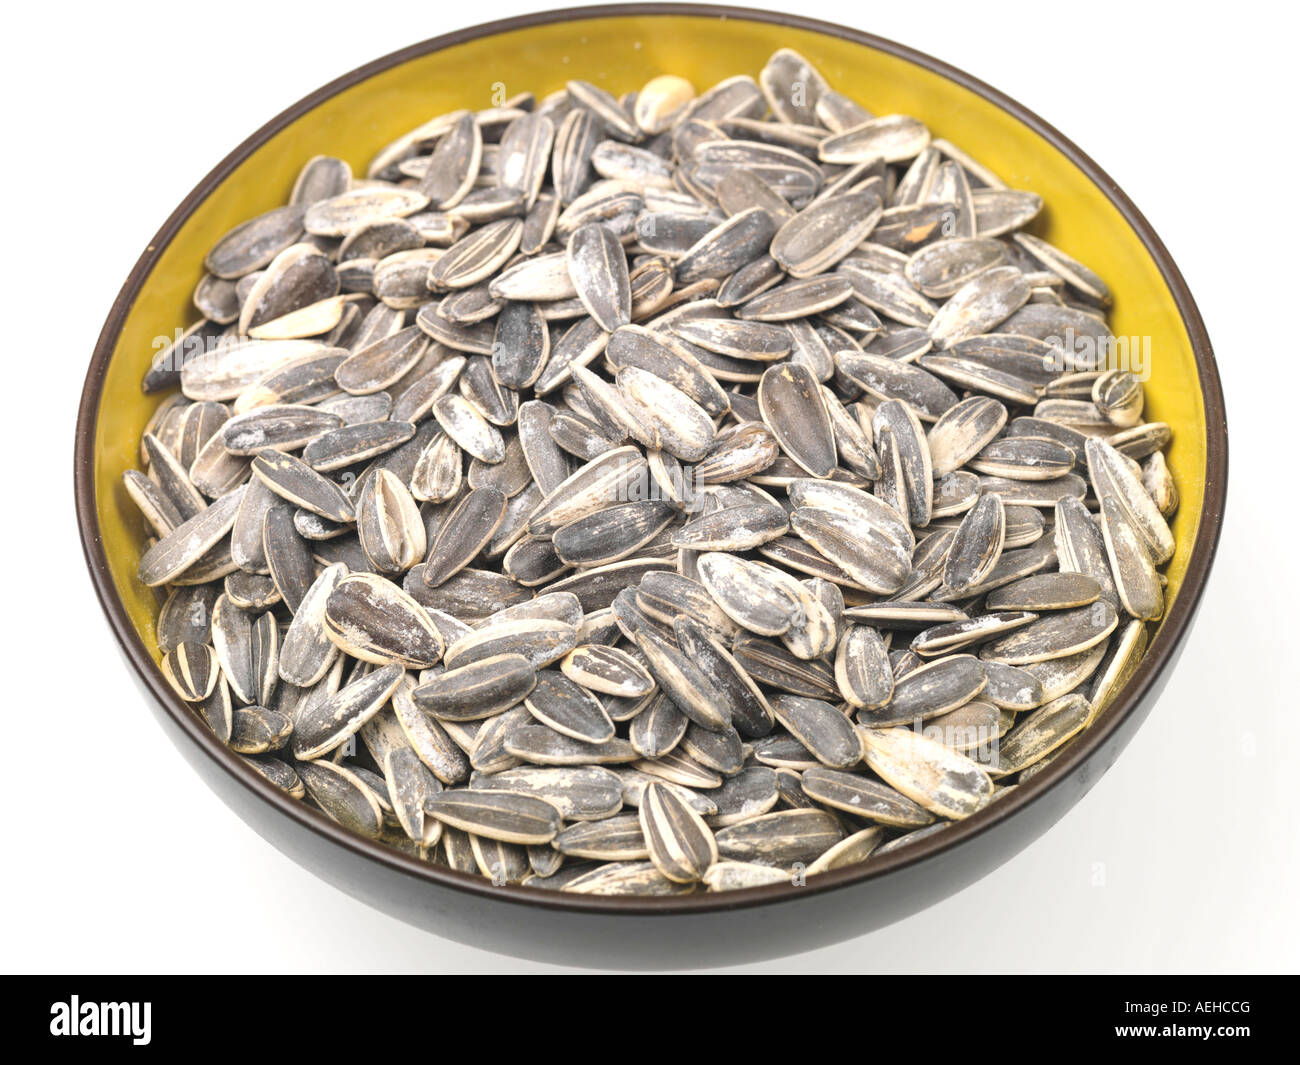 Dried Healthy Edible Sunflower Seeds Isolated Against A White Background With A Clipping Path And No People Stock Photo